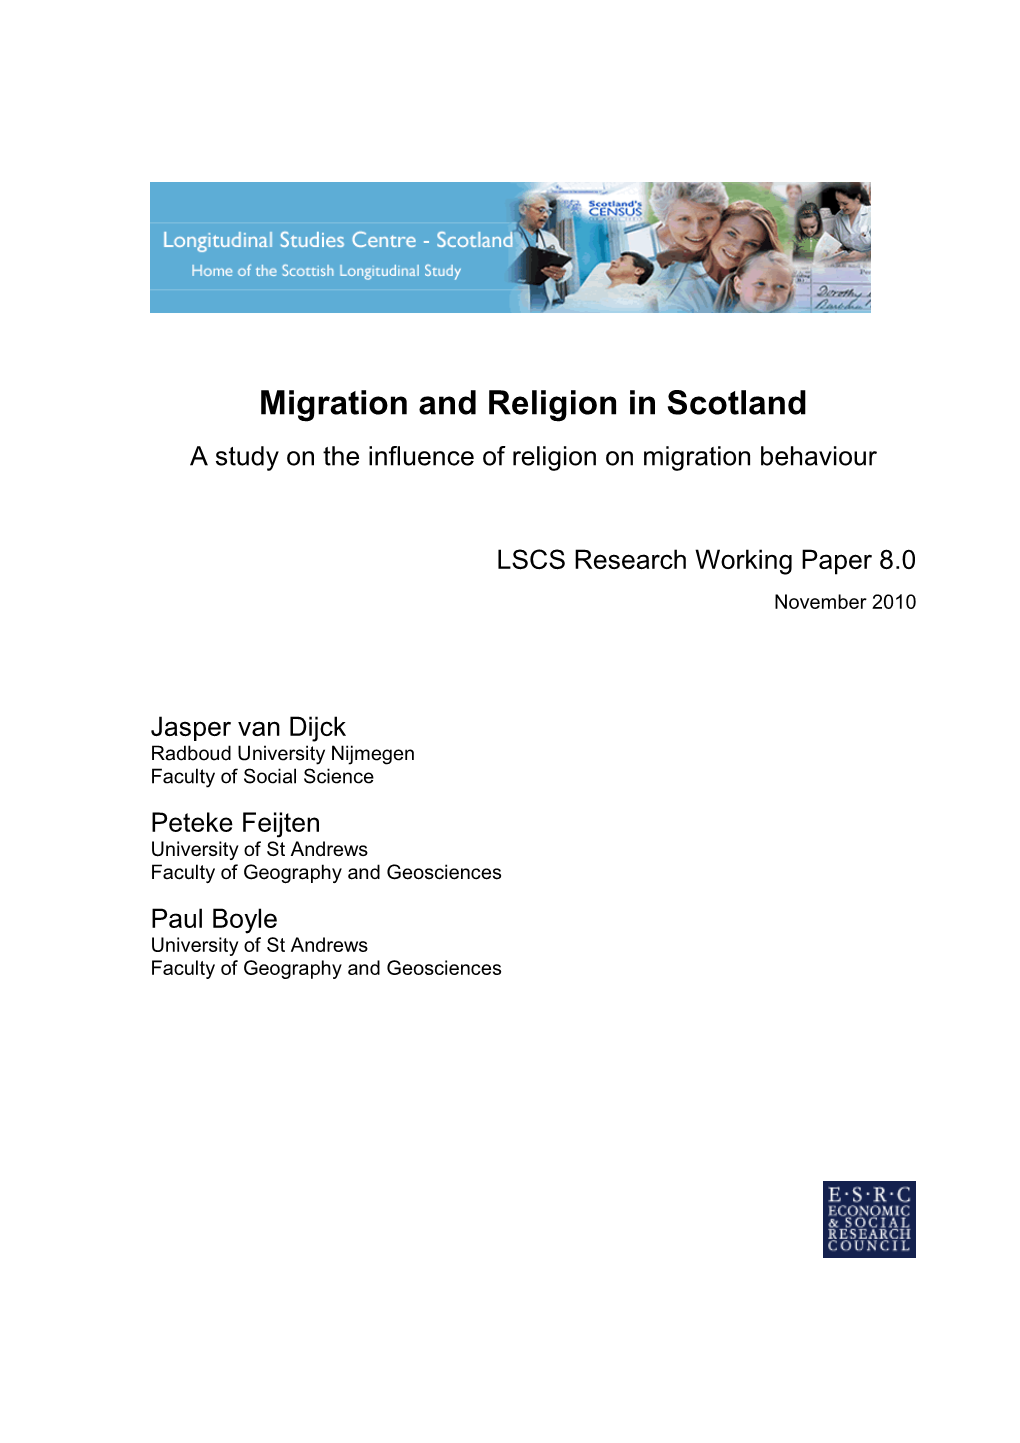 Migration and Religion in Scotland a Study on the Influence of Religion on Migration Behaviour